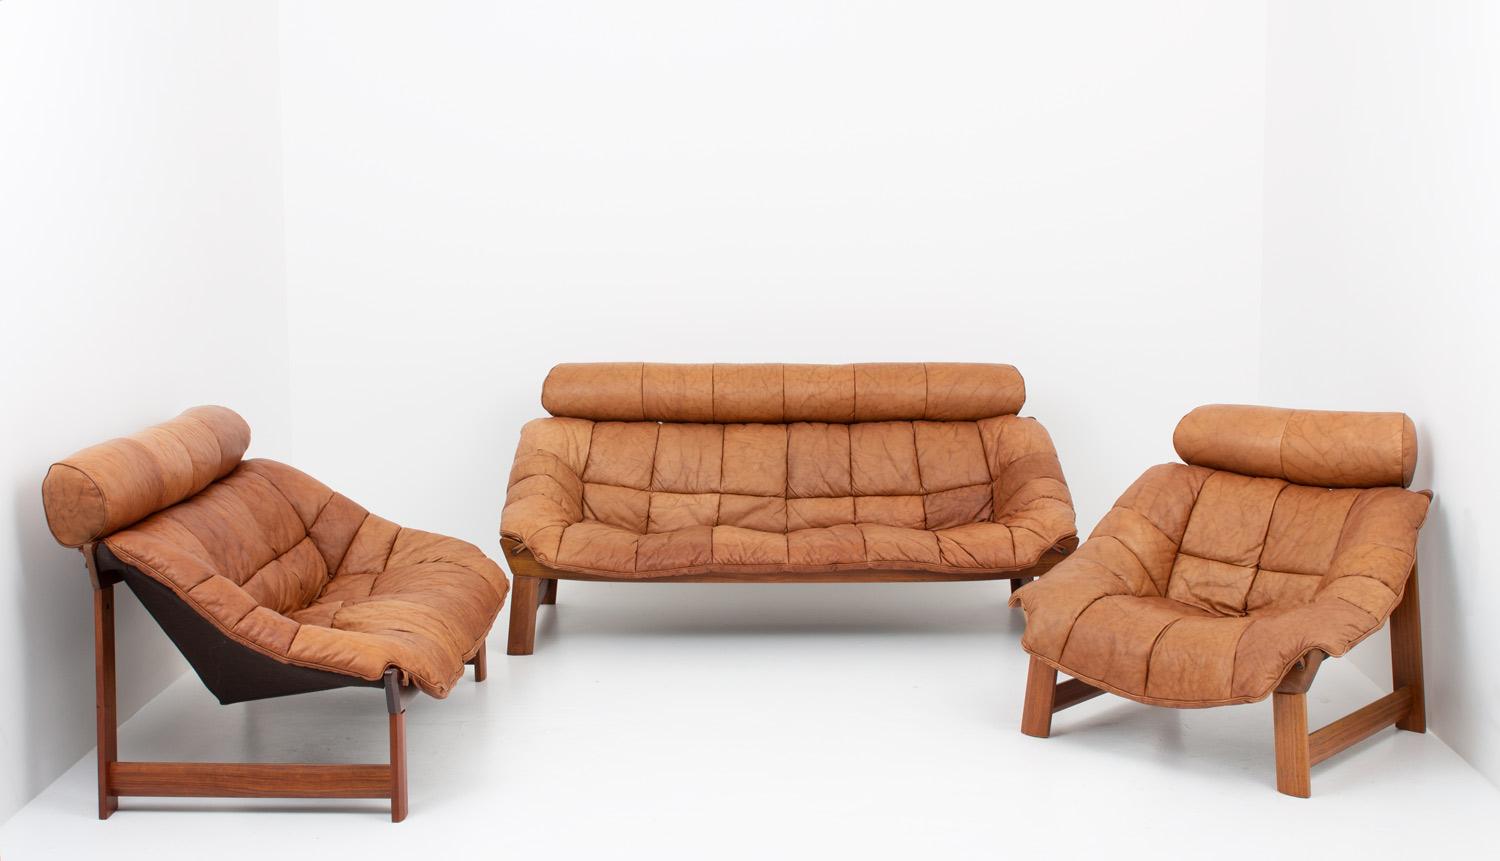 Sofas and lounge chair in rosewood and leather in the style of Percival Lafer, 1970s.
This group consists of one 3-seat, one 2-seat and one lounge chair. This high-quality group features a frame of walnut with angled legs. The cushions are supported